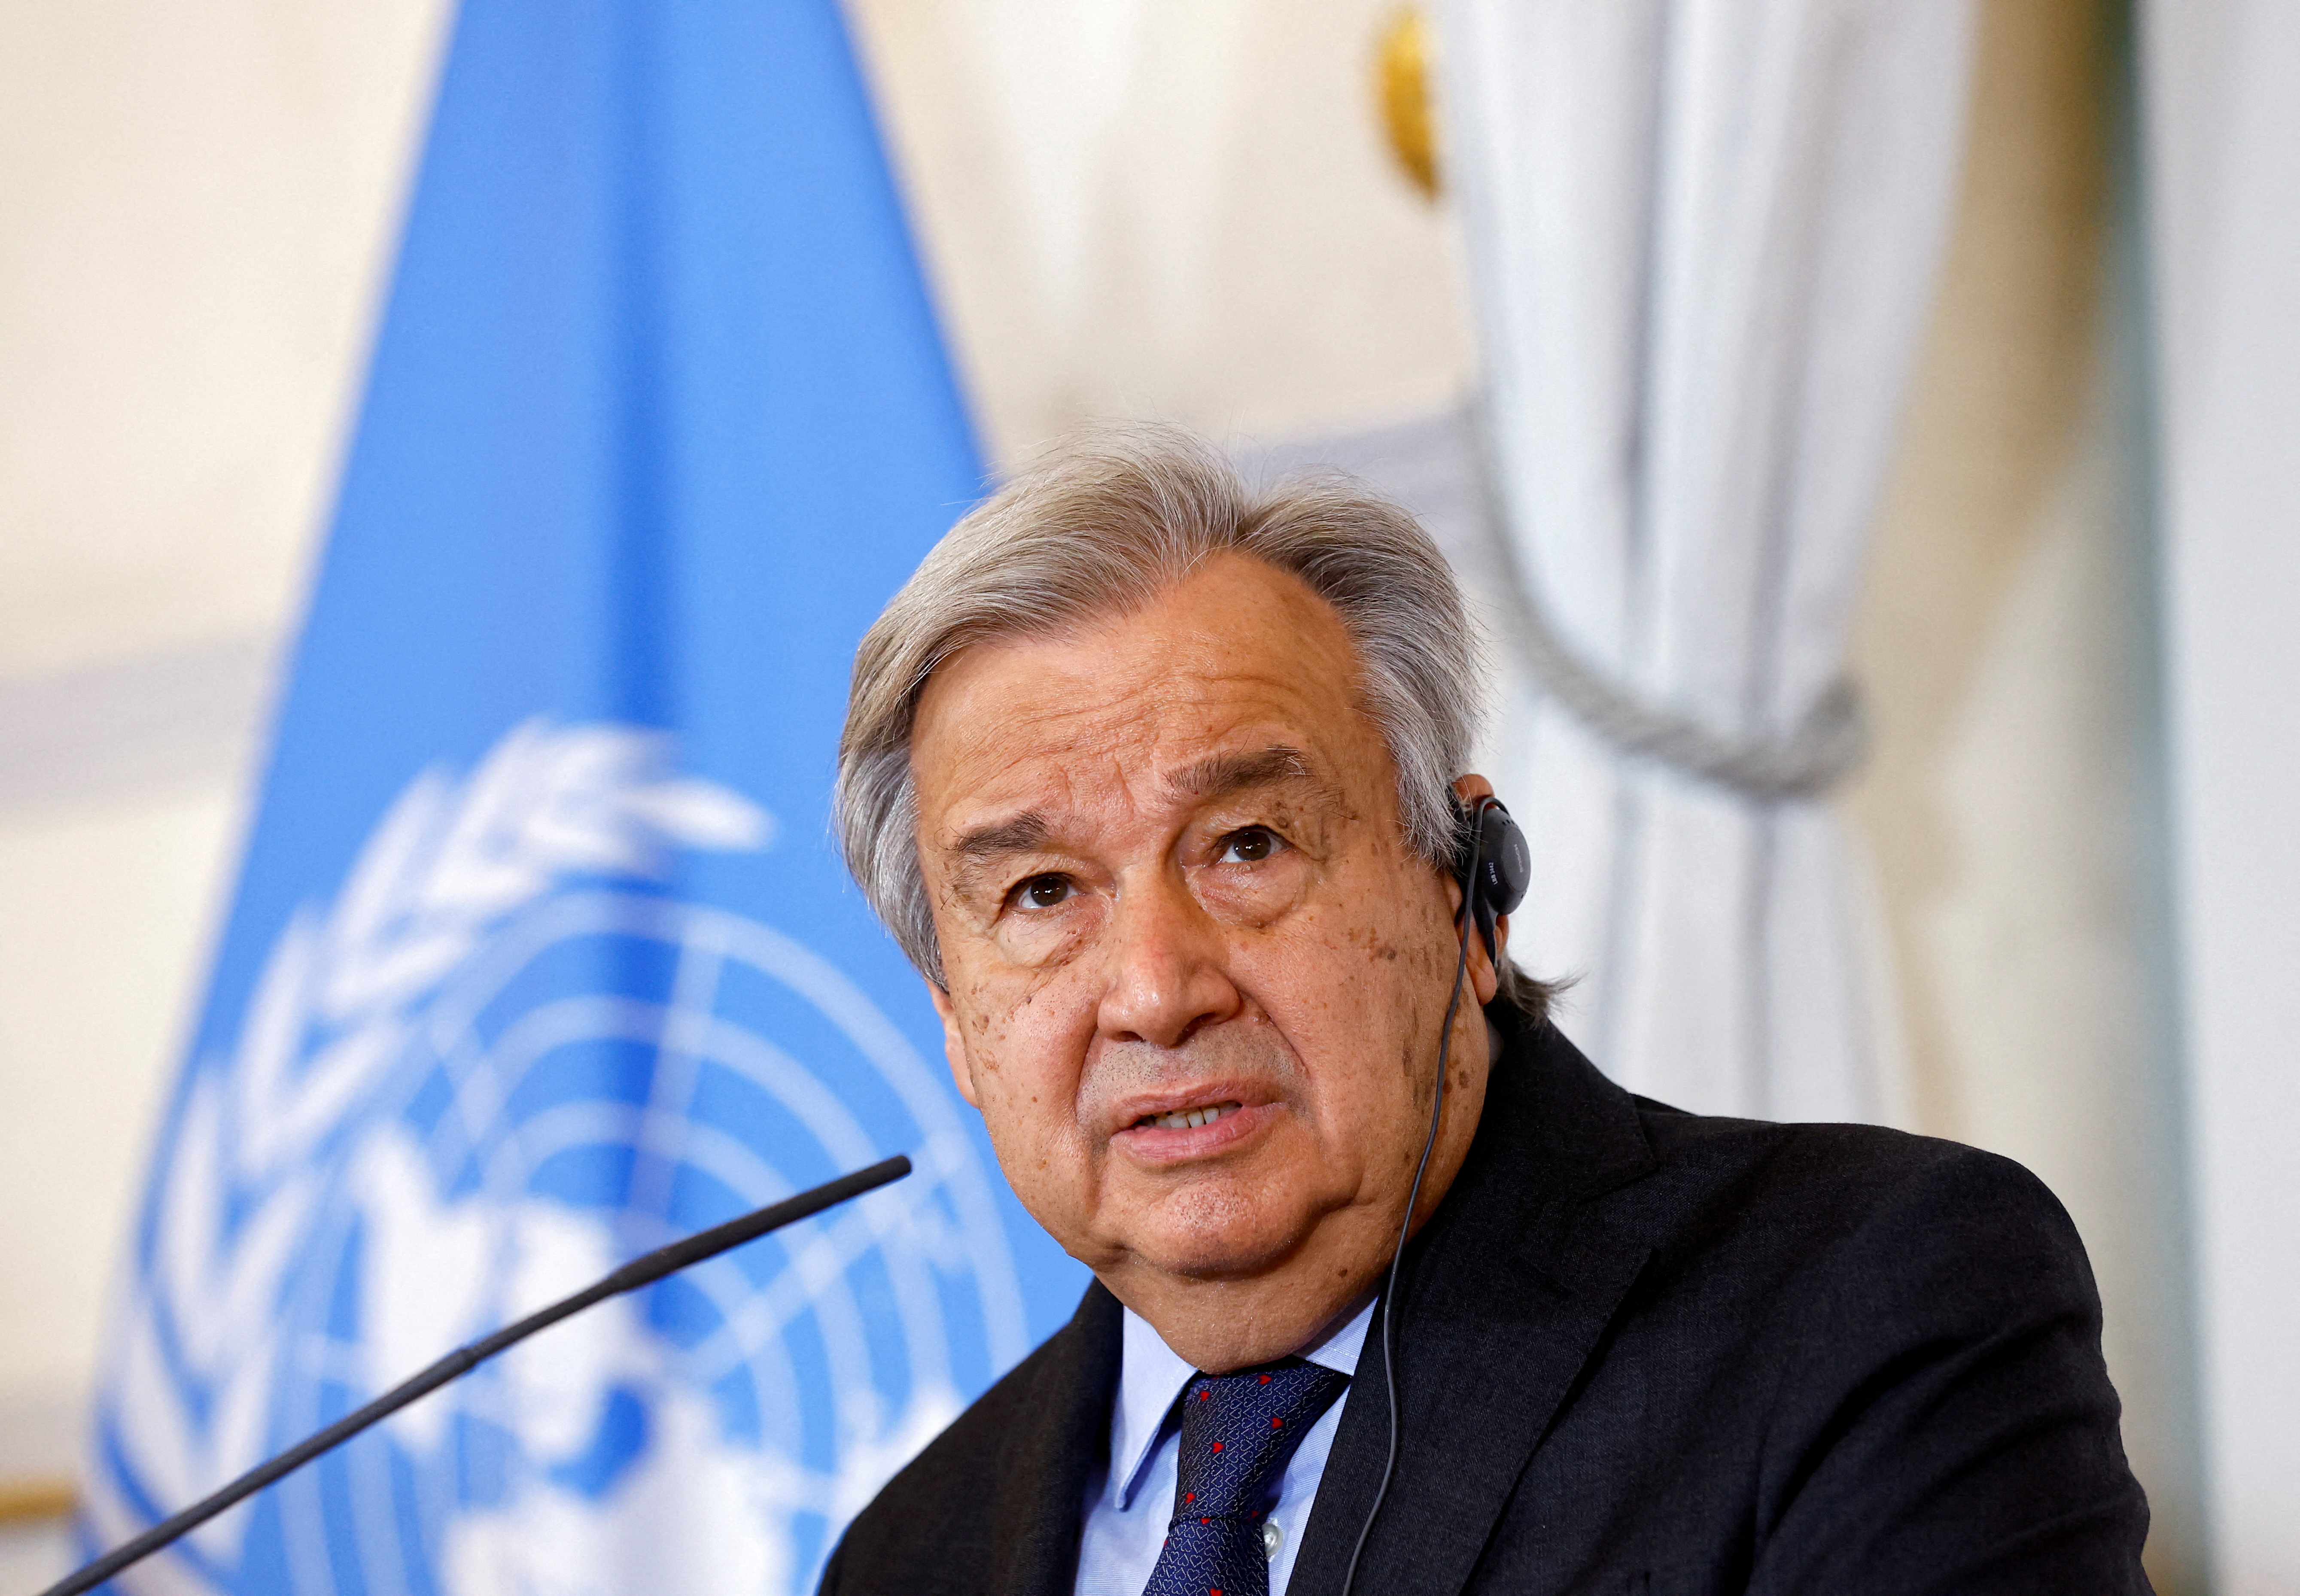 UN Secretary-General meets with Austrian Chancellor and Foreign Minister in Vienna